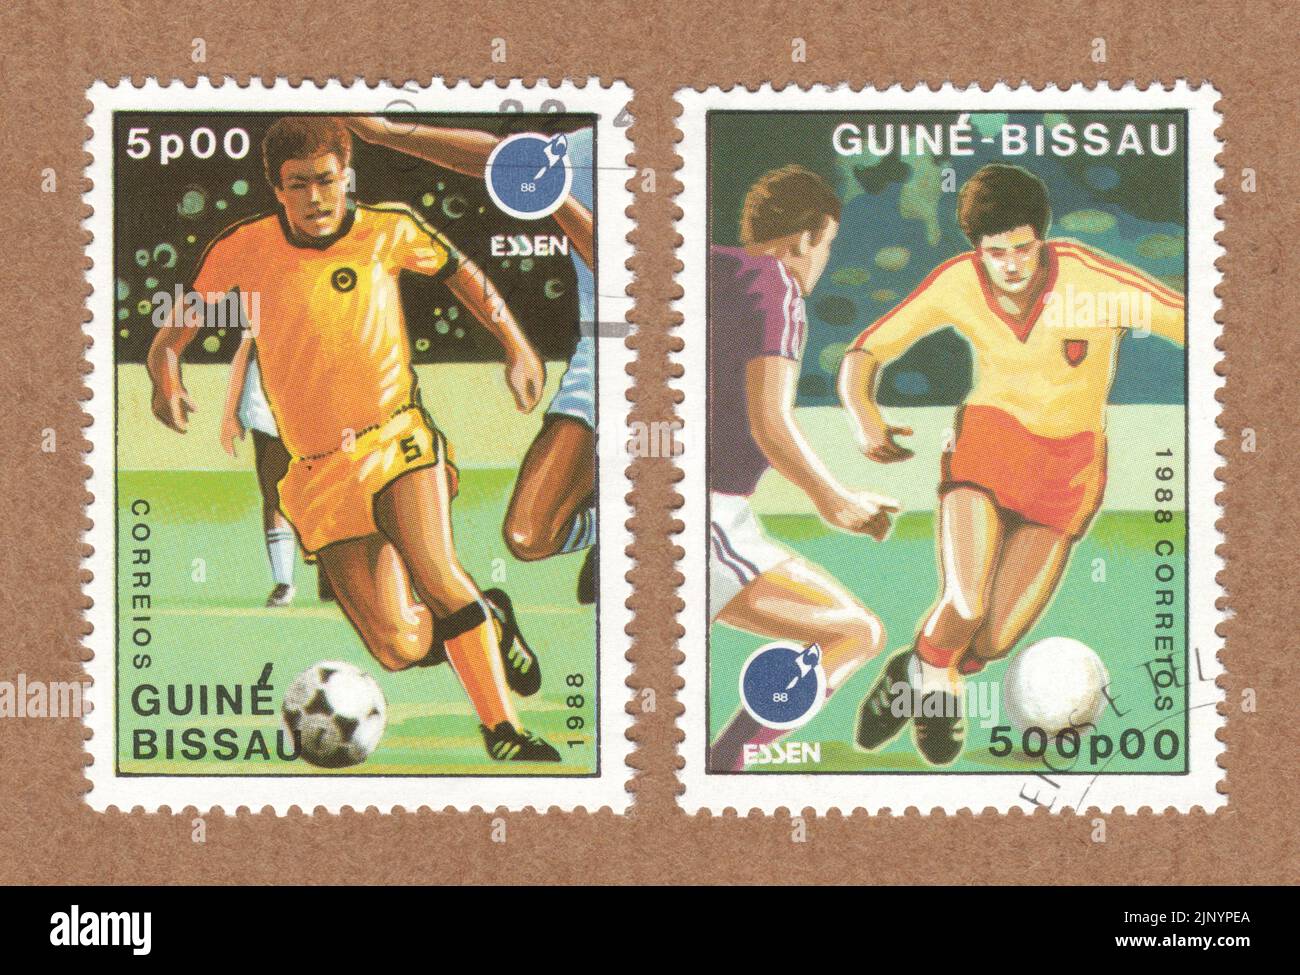 Guine Bissau postage stamps, from the Essen 88, Germany & European Football Championship set created for the 1988 International Stamp Exhibition Stock Photo